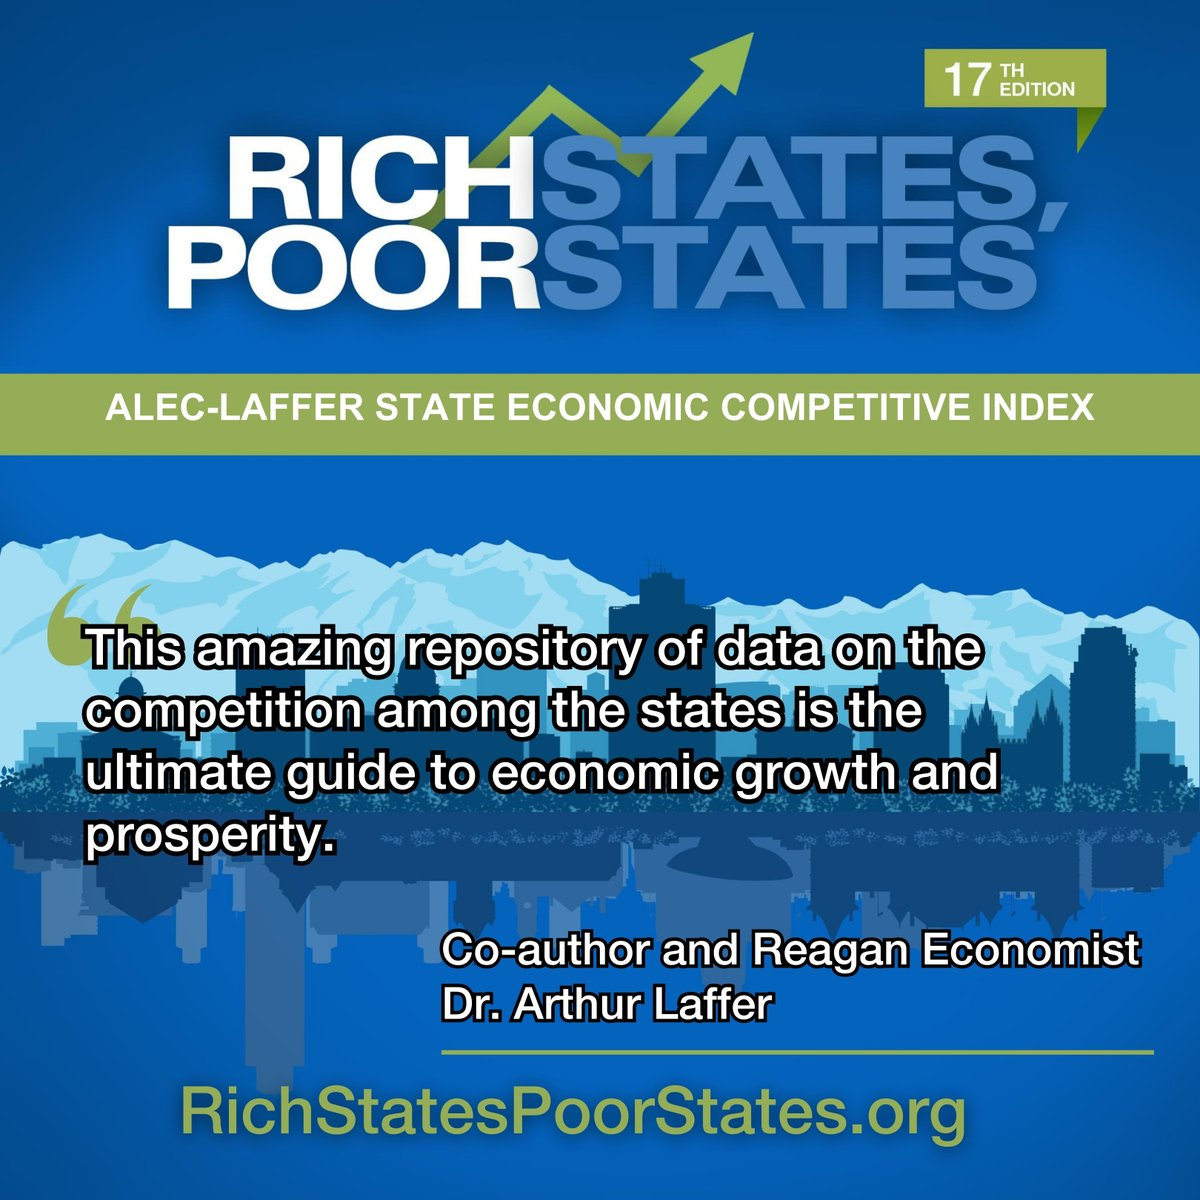 Jonathan Williams of ALEC.org on Rich States, Poor States' 17 Edition